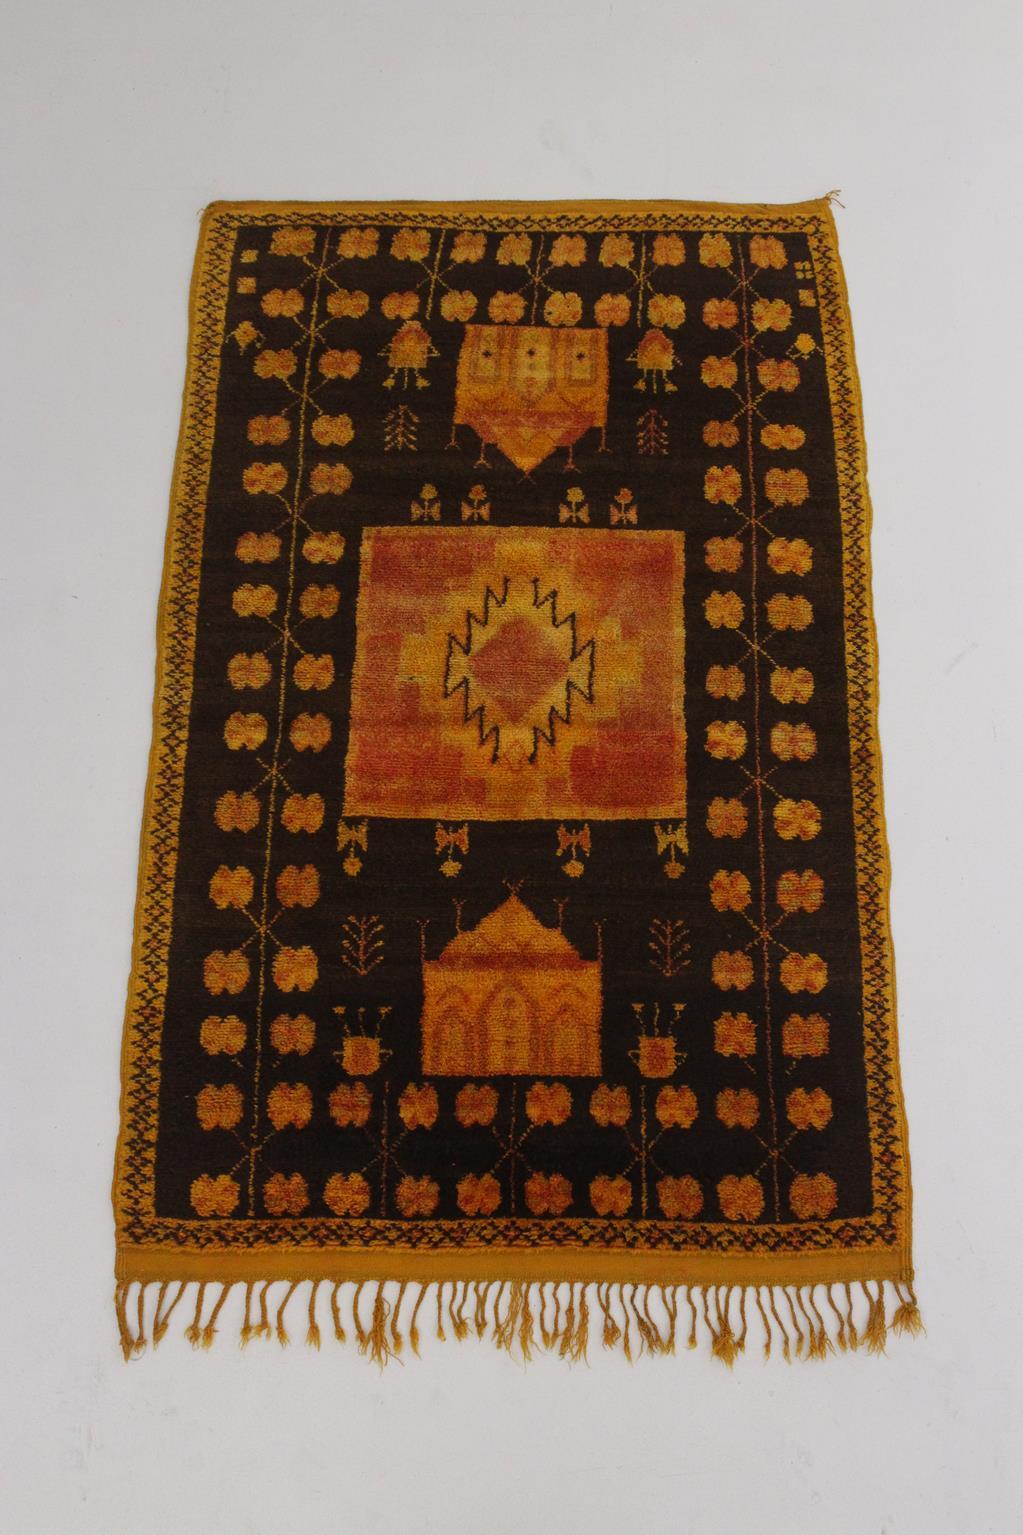 I selected this beautiful rug from piles of carpets because I have always loved a good vintage Taznakht rug with bright, saffron color. The background color of this one is a dark brown with saffron and faded red designs all over it. You can spot